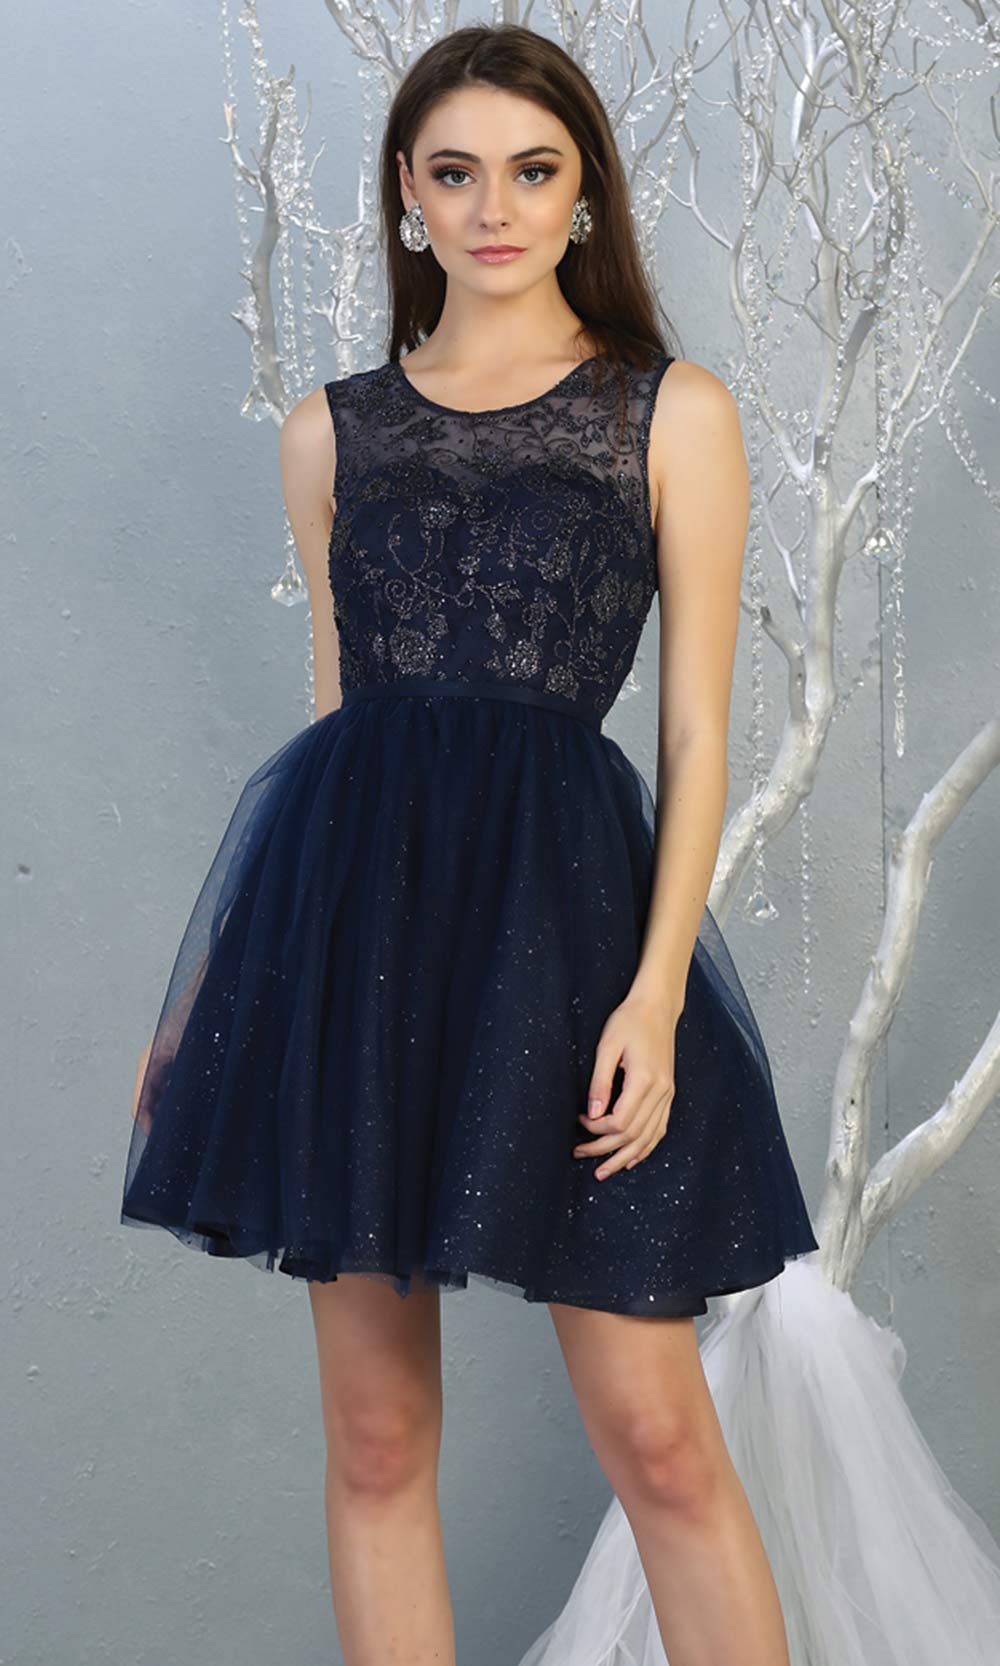 Mayqueen MQ1803 short navy blue sequin flowy high neck grade 8 graduation dress w/puffy skirt. Dark blue party dress is perfect for prom, graduation, grade 8 grad, confirmation dress, bat mitzvah dress, damas. Plus sizes avail for grad dress.jpggrade 8 grad dresses, graduation dresses